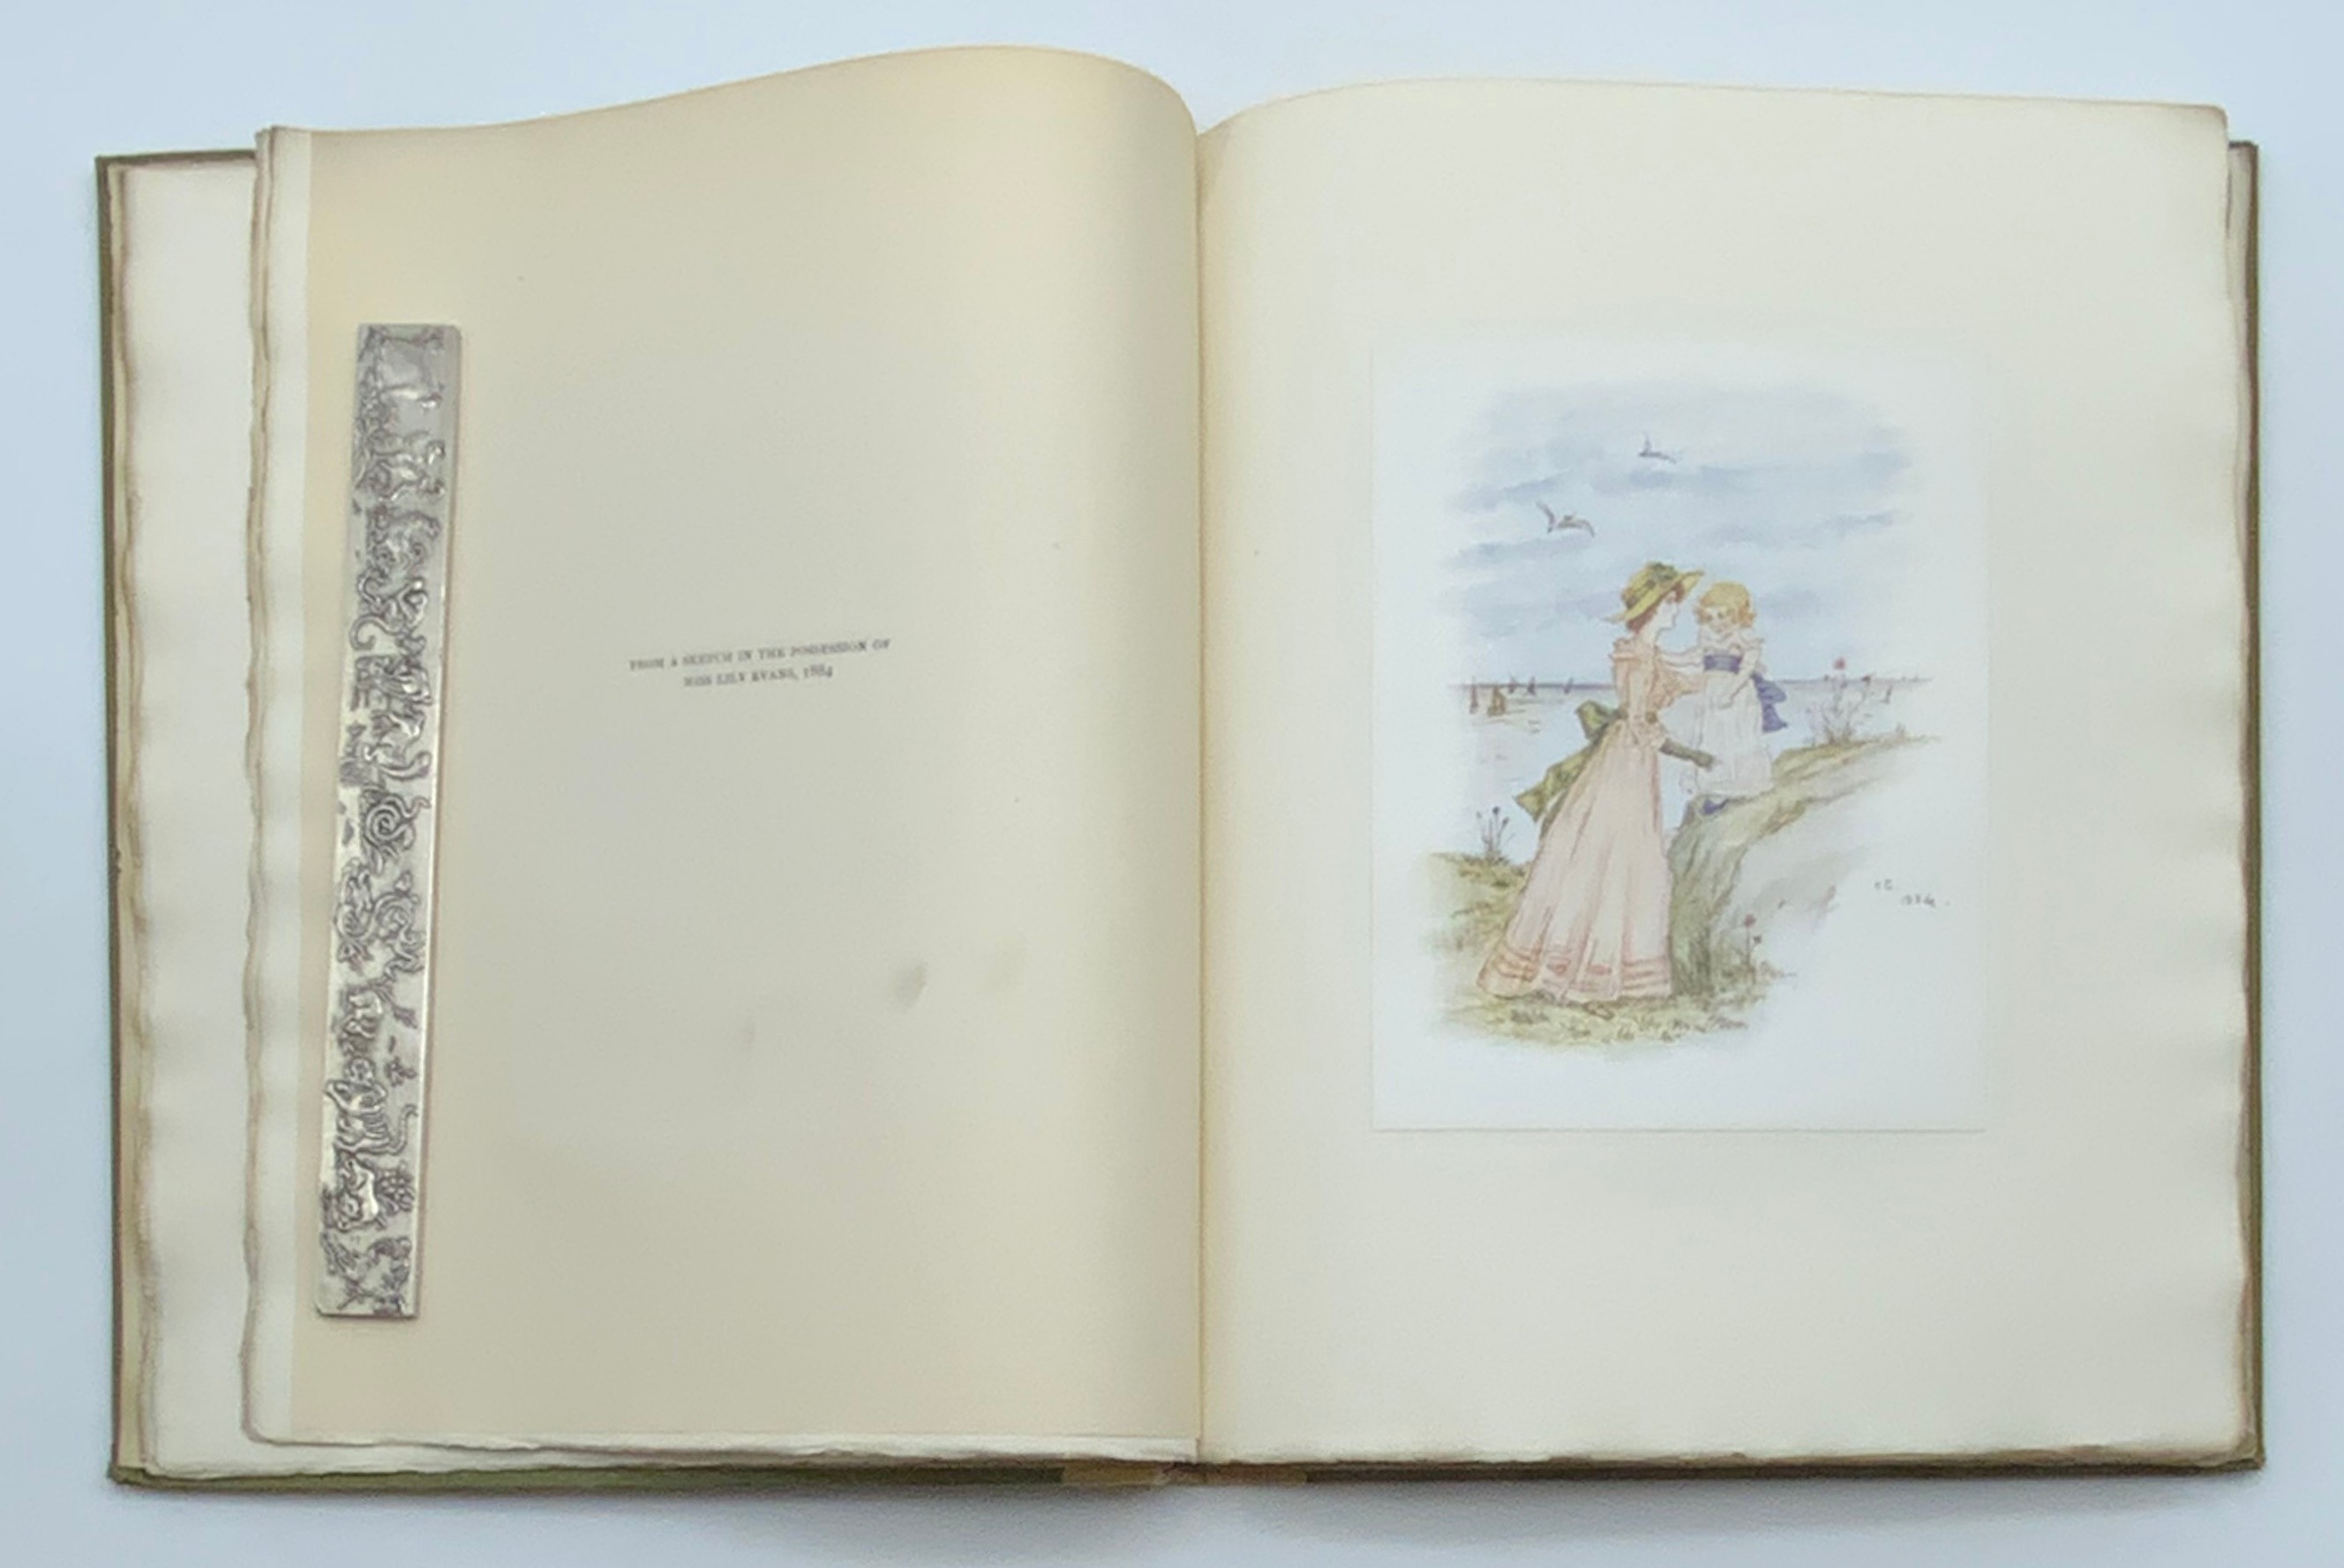 1921 KATE GREENAWAY PICTURES FROM ORIGINALS PRESENTED BY HER TO JOHN RUSKIN - Image 6 of 9